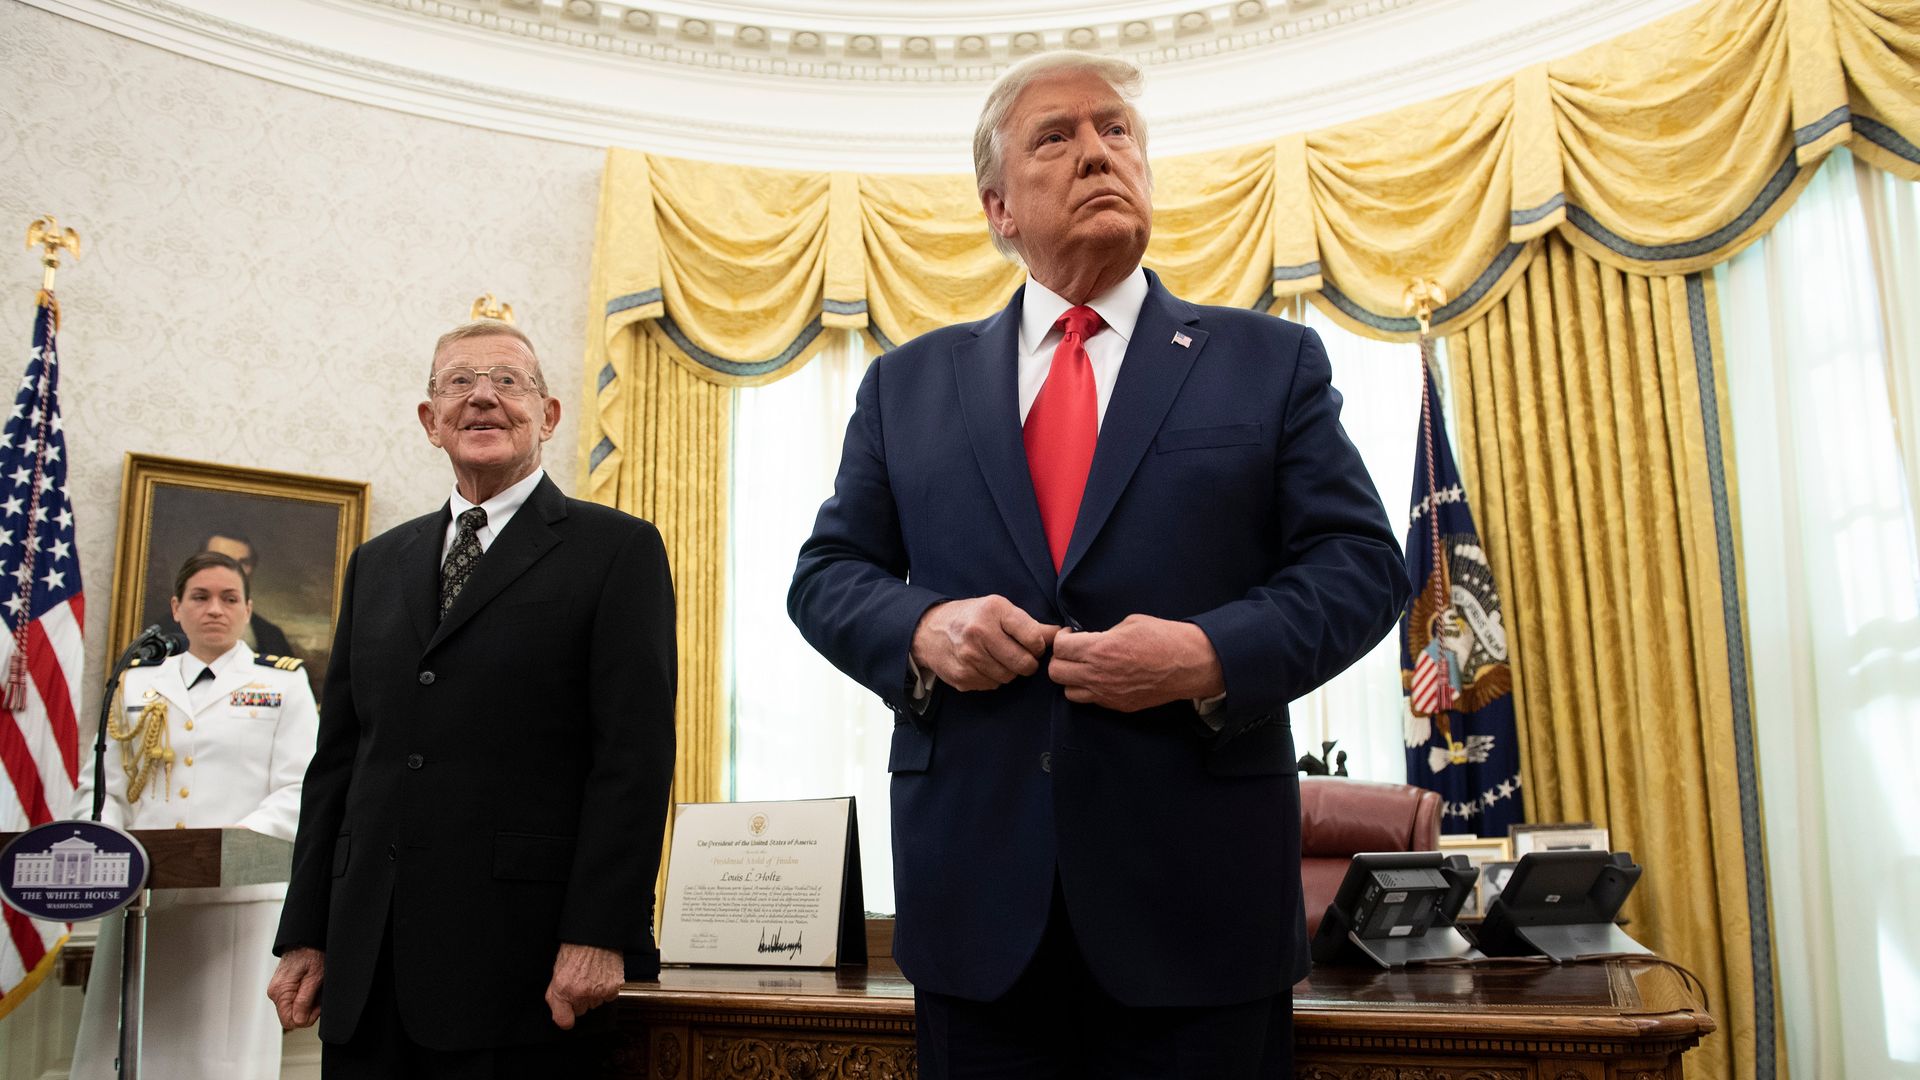 Photo of Donald Trump standing in the Oval Office next to Lou Holtz